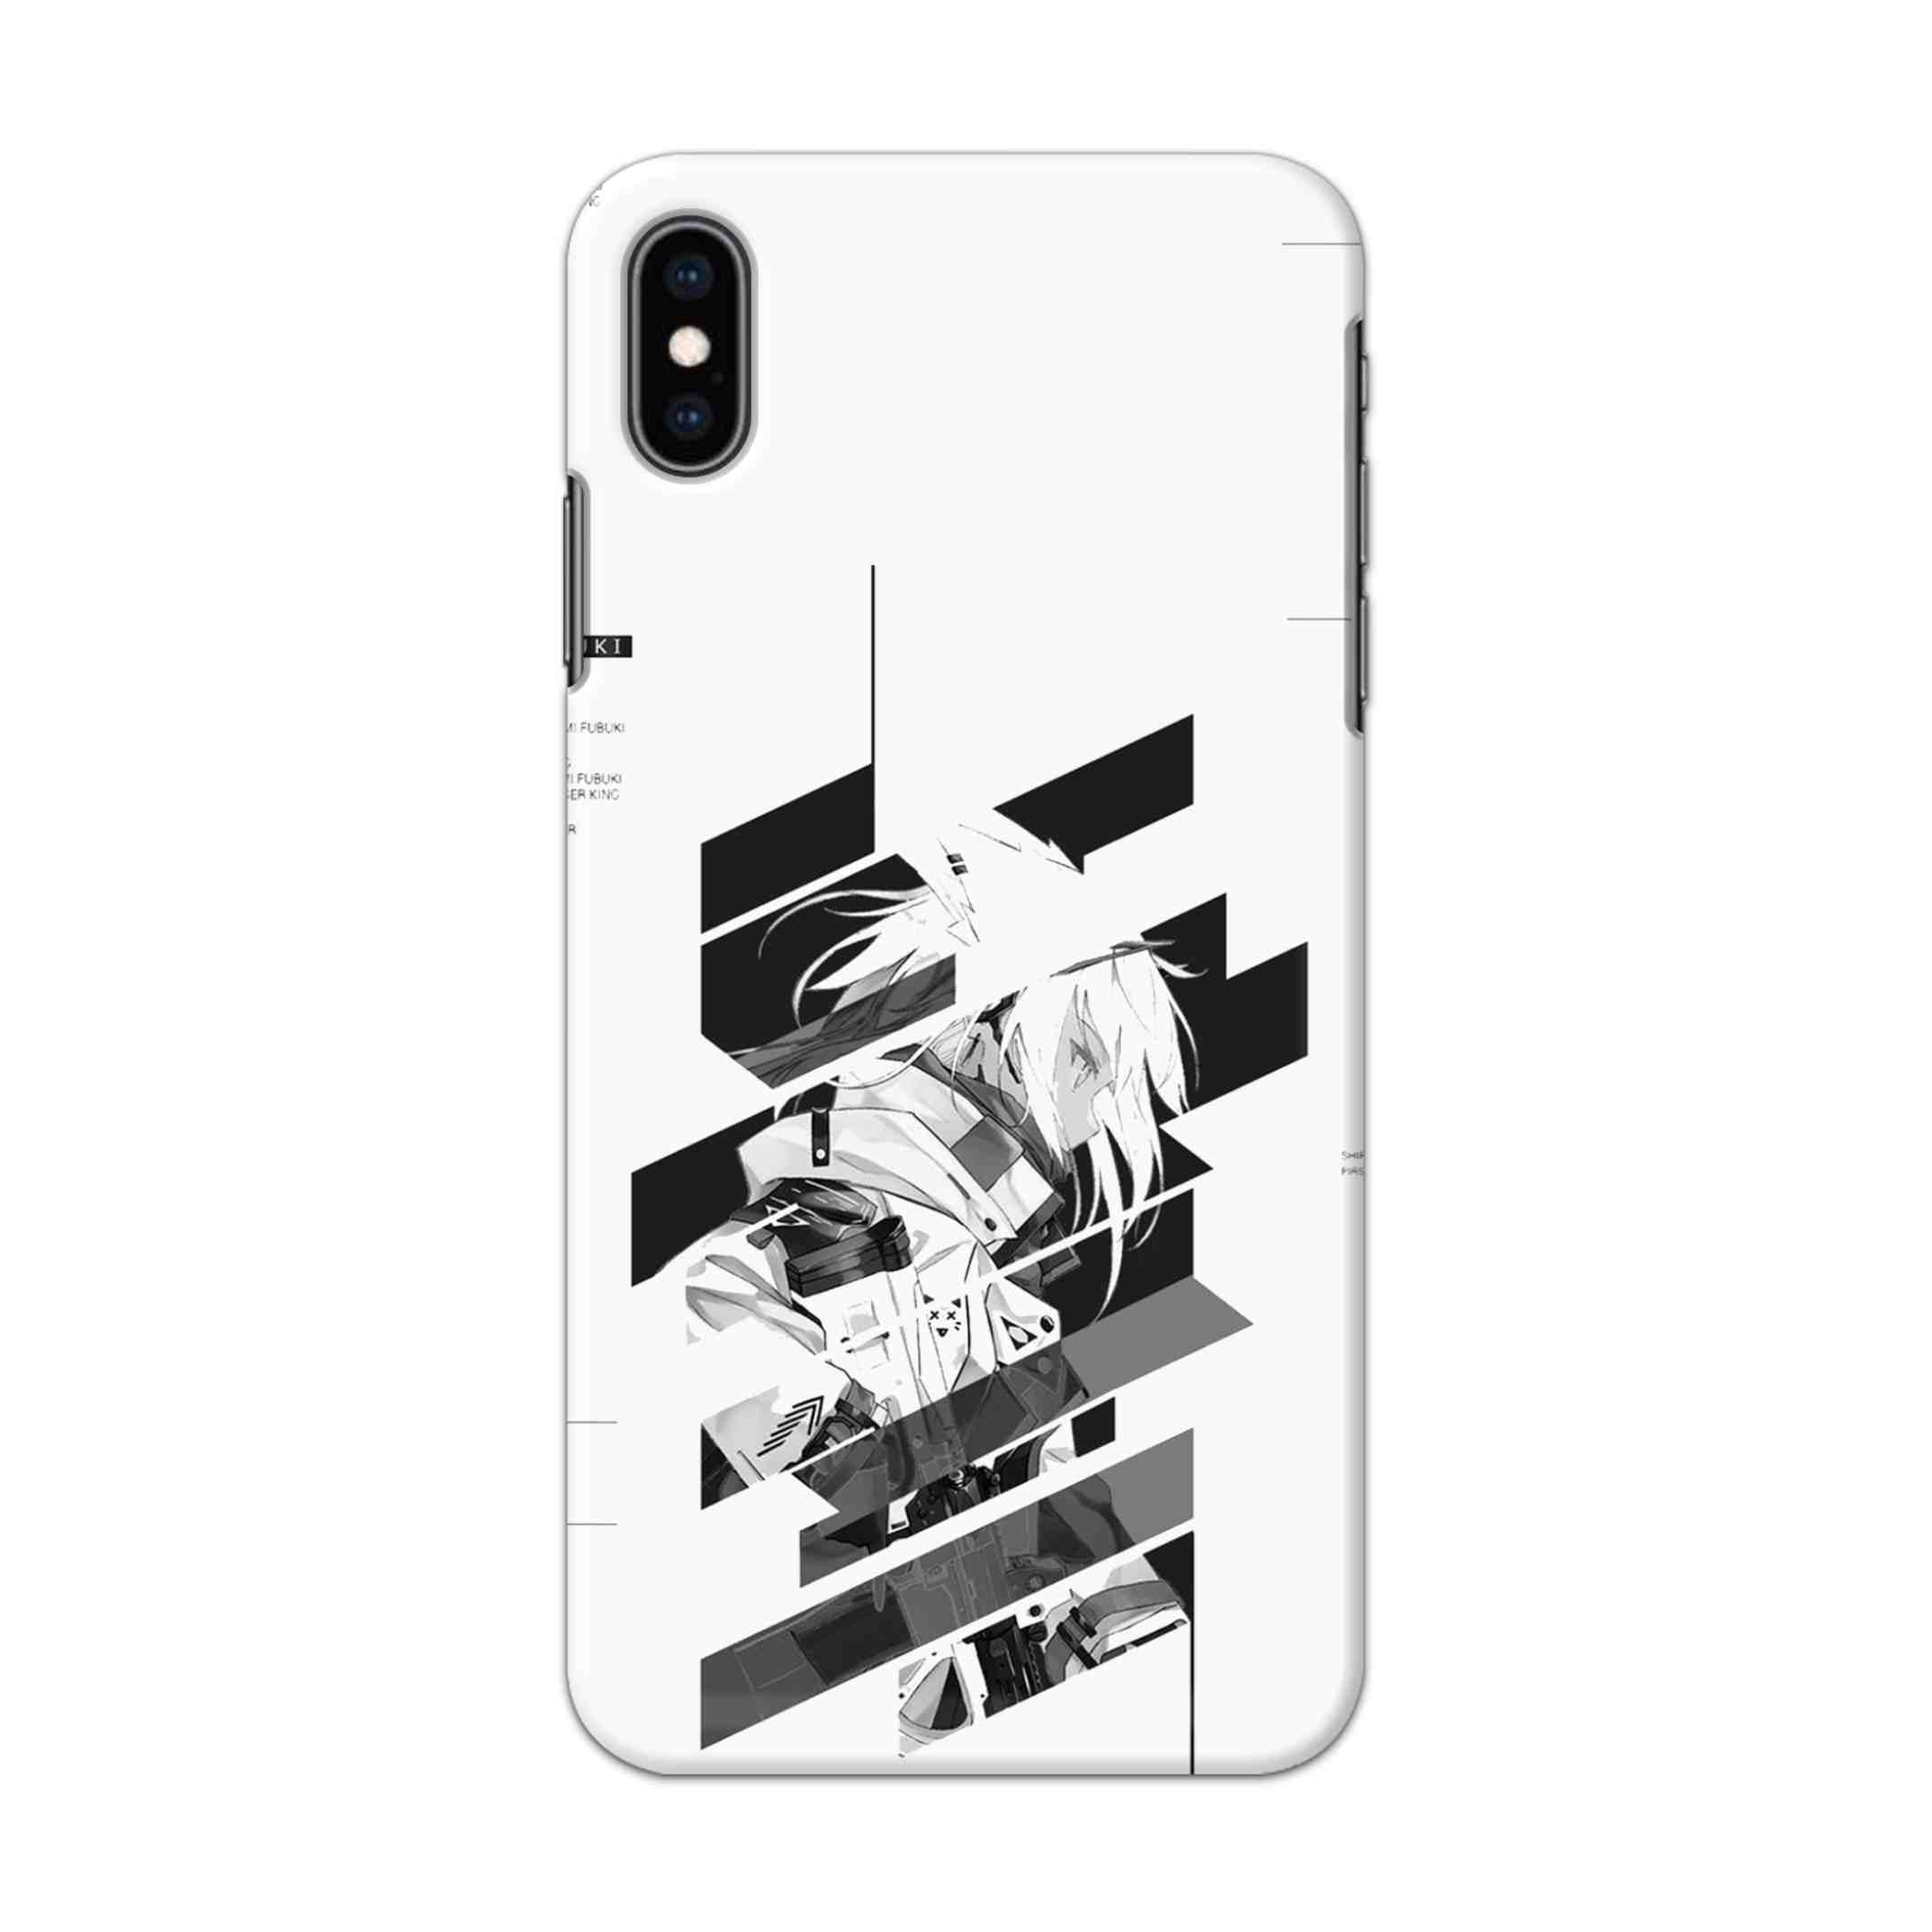 Buy Fubuki Hard Back Mobile Phone Case/Cover For iPhone XS MAX Online